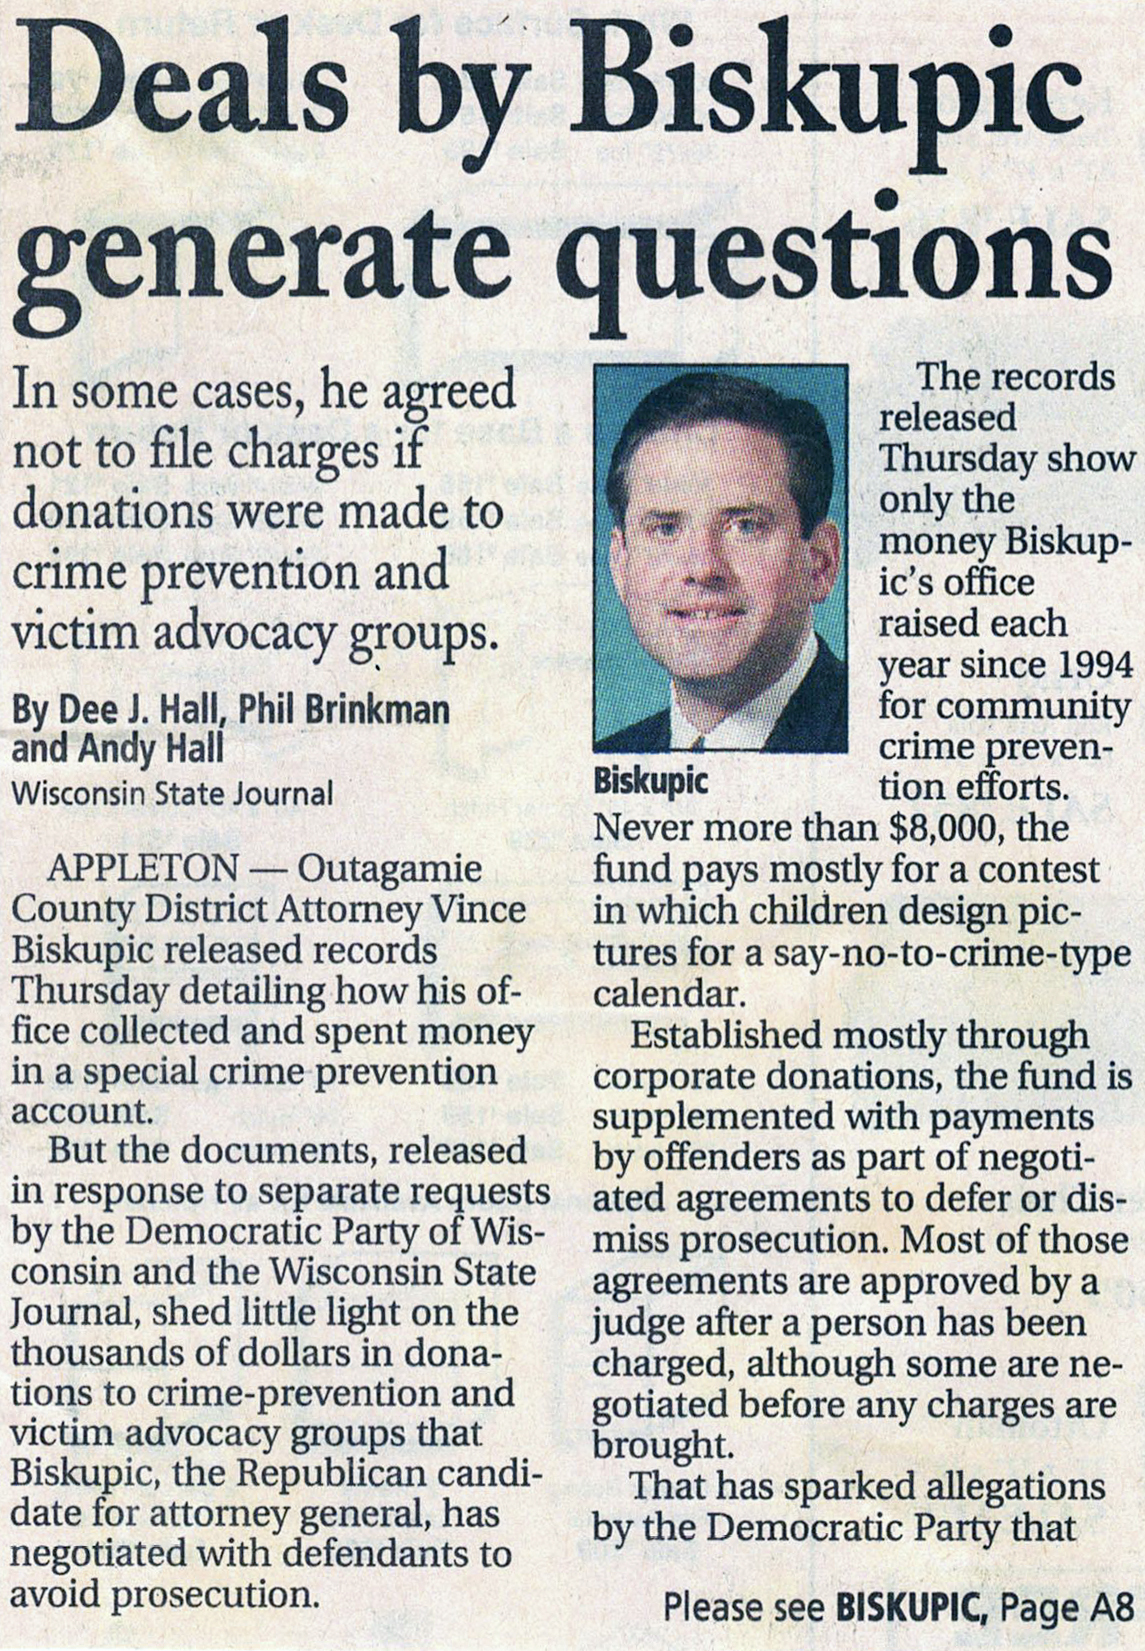 A Wisconsin State Journal front page story on Nov. 2, 2002 broke the news that Outagamie County District Attorney Vince Biskupic had been soliciting payments to a crime-prevention fund and local organizations in exchange for agreements not to prosecute in